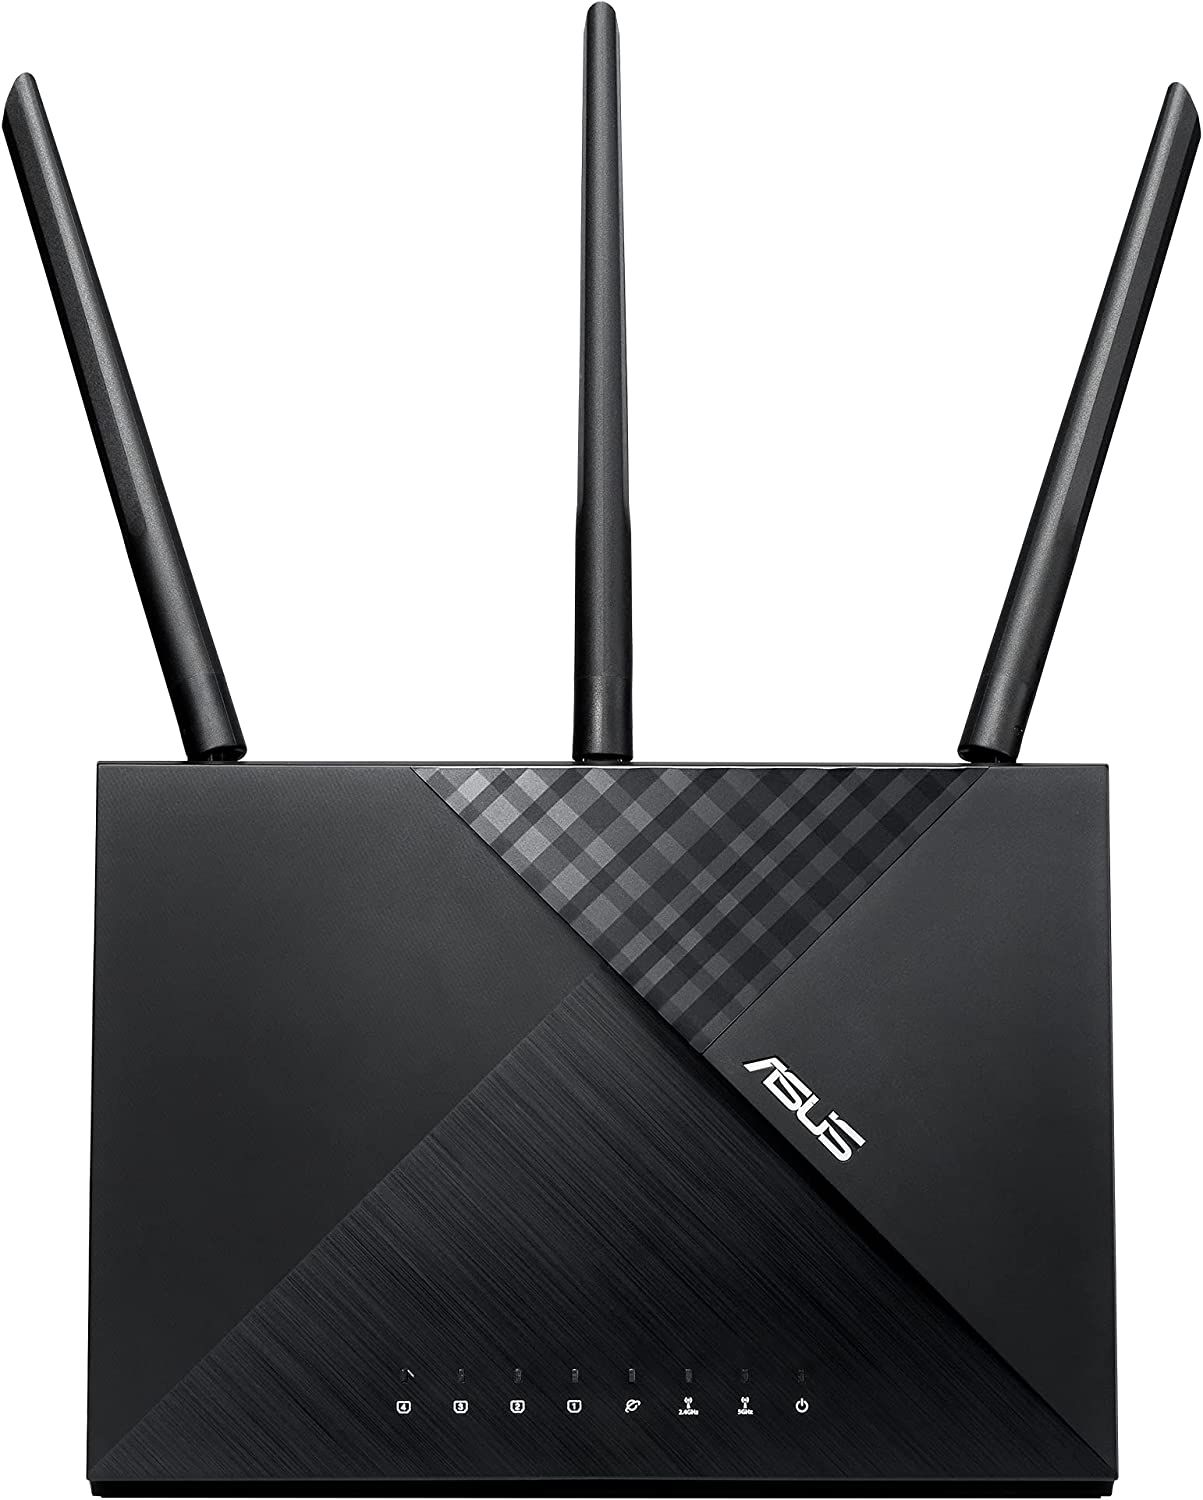 ASUS AC1750 (RT-ACRH18) Wi-Fi Router